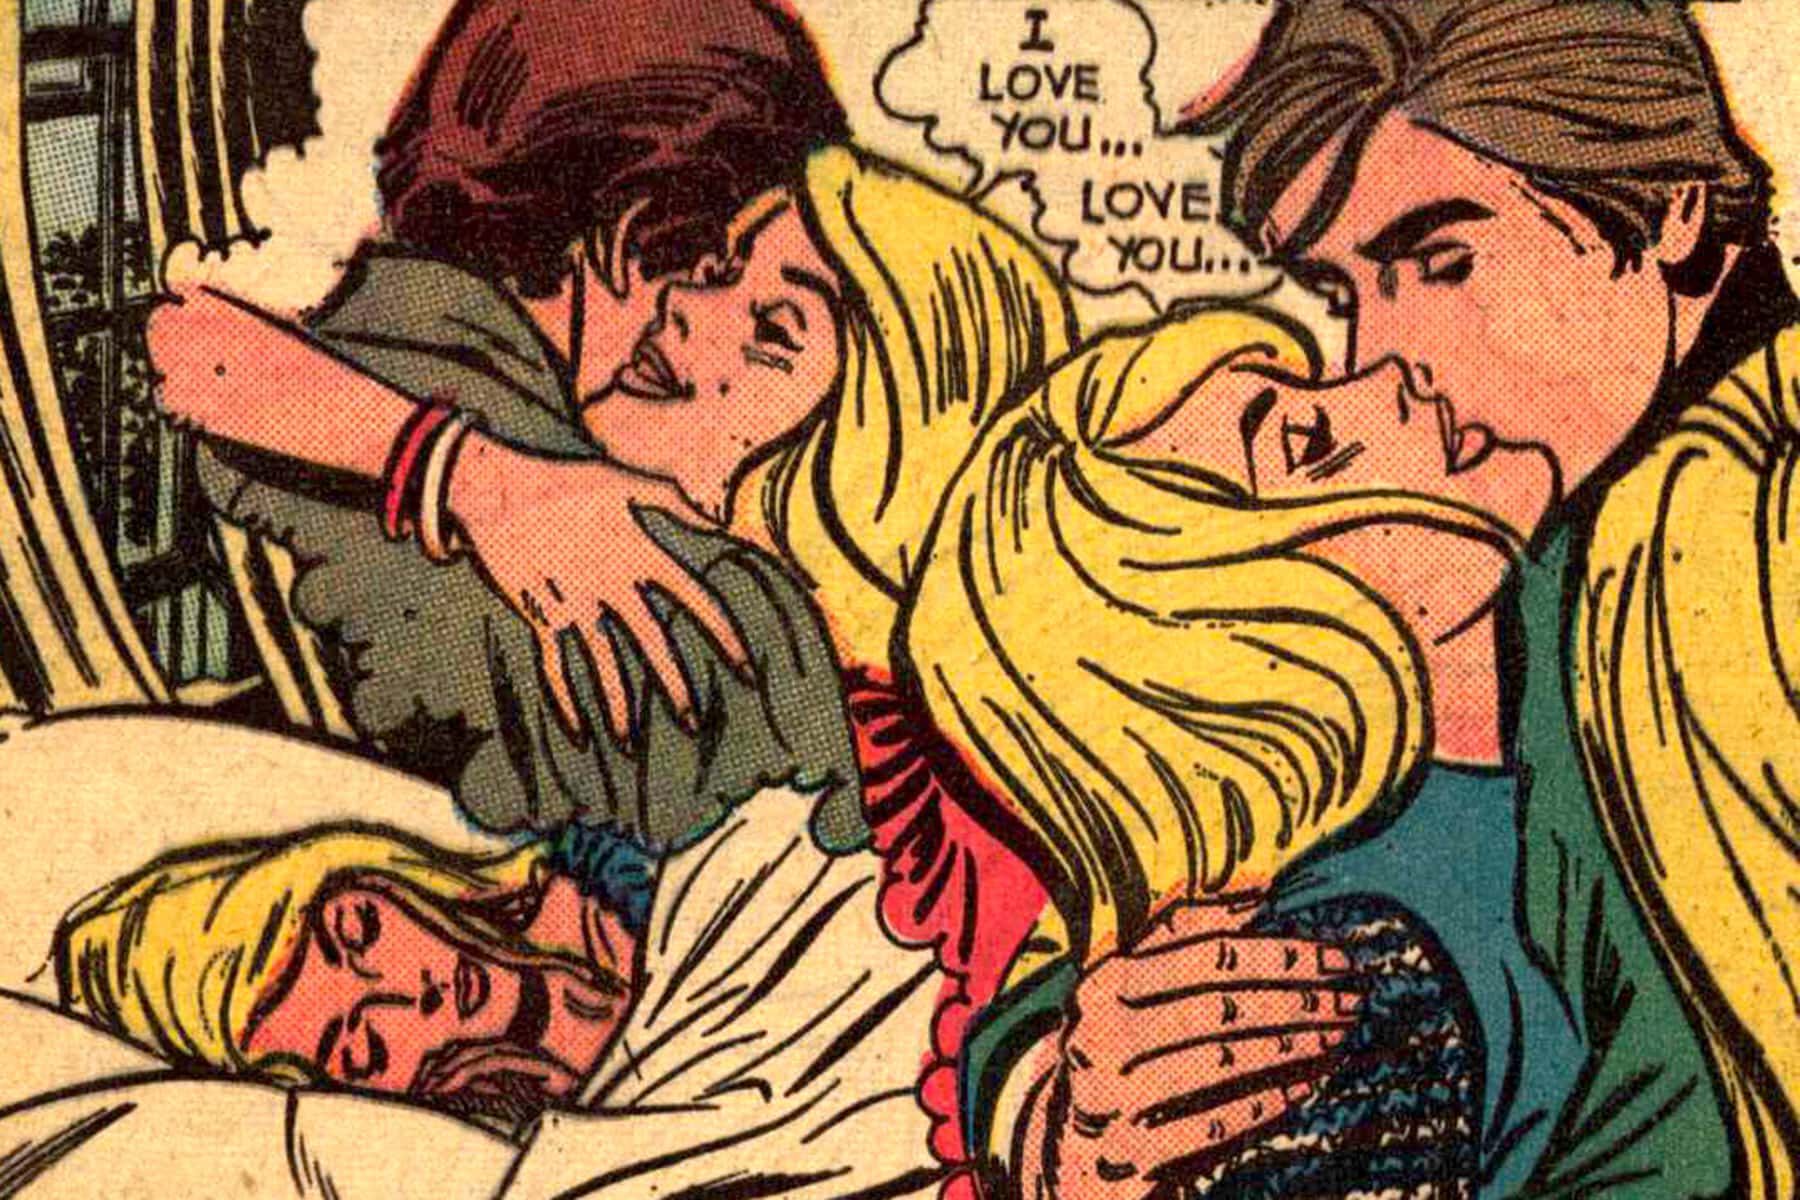 Love Stories When Superheroes Fell From Fashion And Romance Comic Books Briefly Dominated The